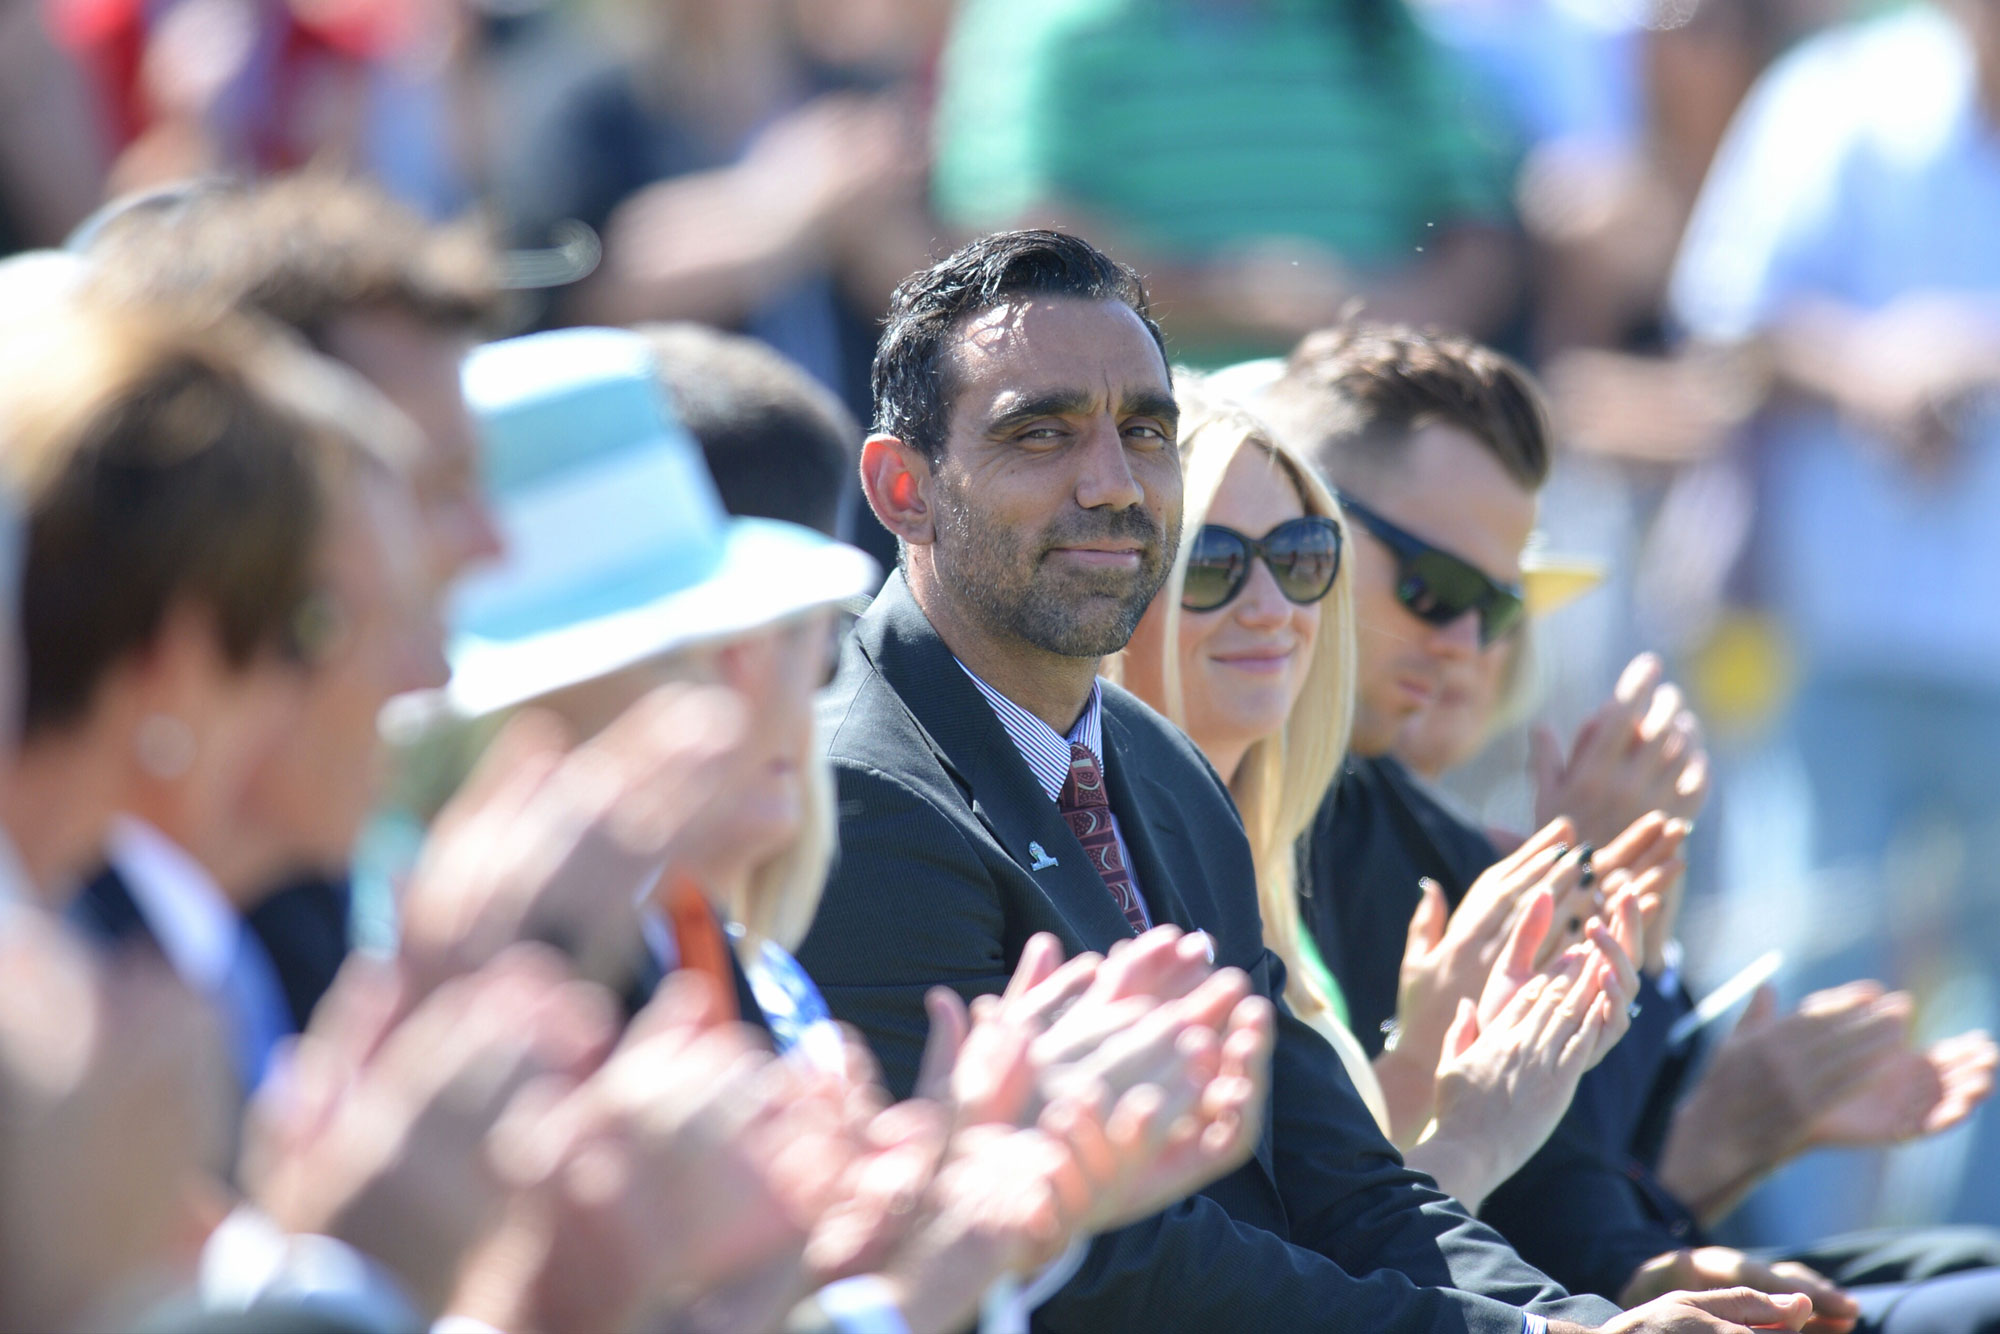 Adam Goodes, 2014 Australian of the Year, attends the Australia Day citizenship ceremony in Canberra, 26 January 2014.